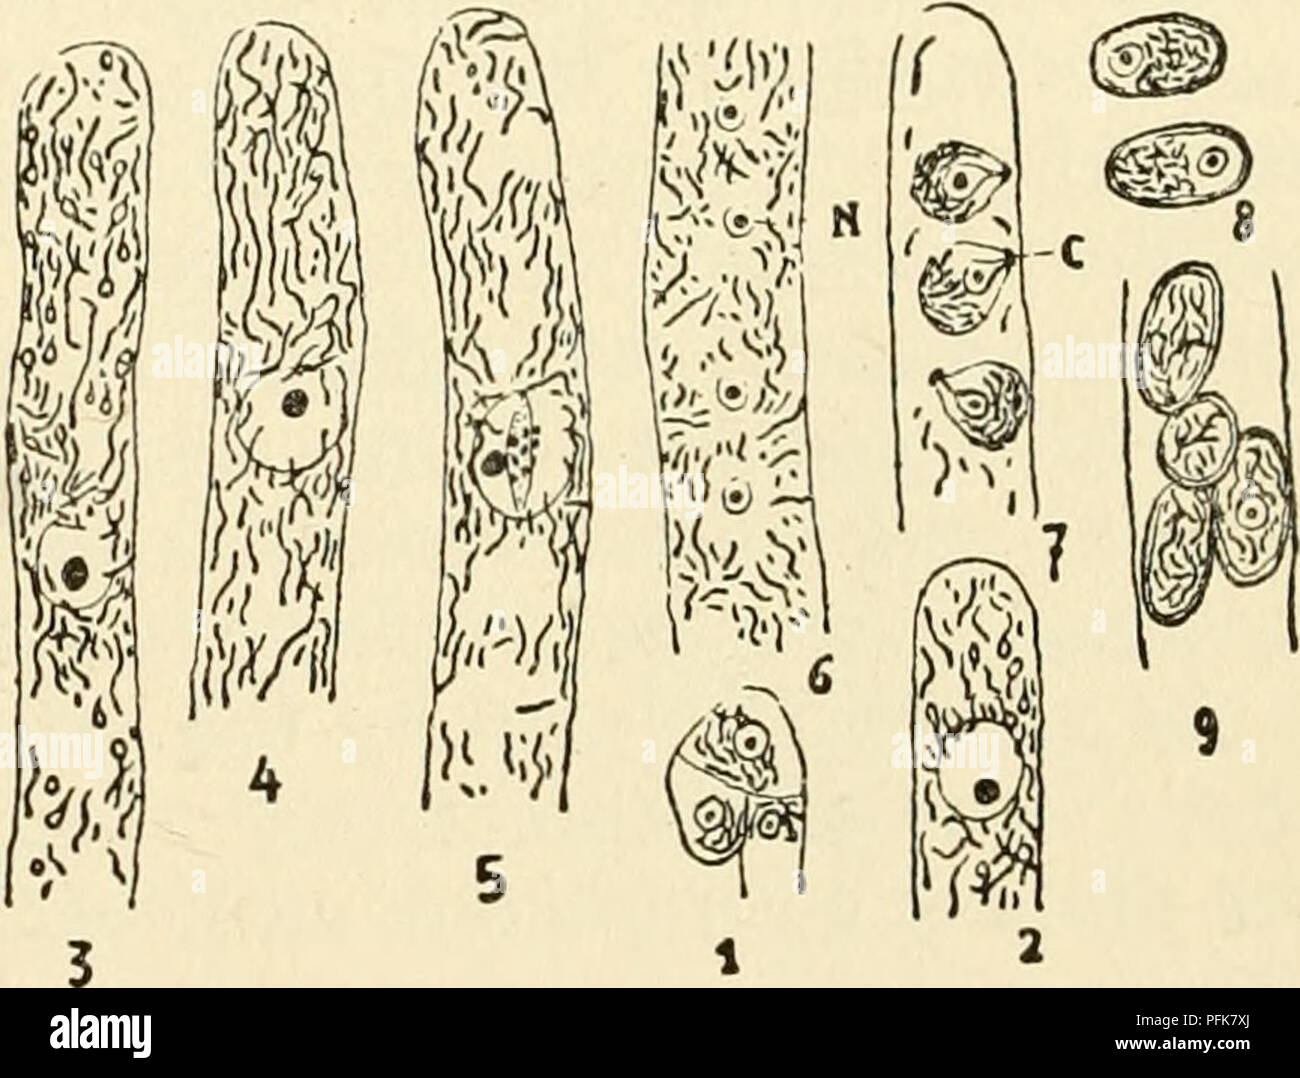 . The cytoplasm of the plant cell. Plant cells and tissues; Protoplasm. Fig. 27 (left). — Development of the chondriome in Leptomitus. 1, chondrioconts in the vegetative filament: 2, 3. fragmentation of the chondrioconts and grouping about the nuclei during the formation of the zoospores; 4, granular chondriosomes in the zoospores; 5-7, ger- mination of the zoospores, elongation of chondriosomes into chondrioconts. C. chondriocont. N, nucleus. Meves' method, stained with acid fuchsin. Fig. 28 (right). — Development of the chondriome in the ascus of Pustularia vesiculosa. 1. very young ascus af Stock Photo